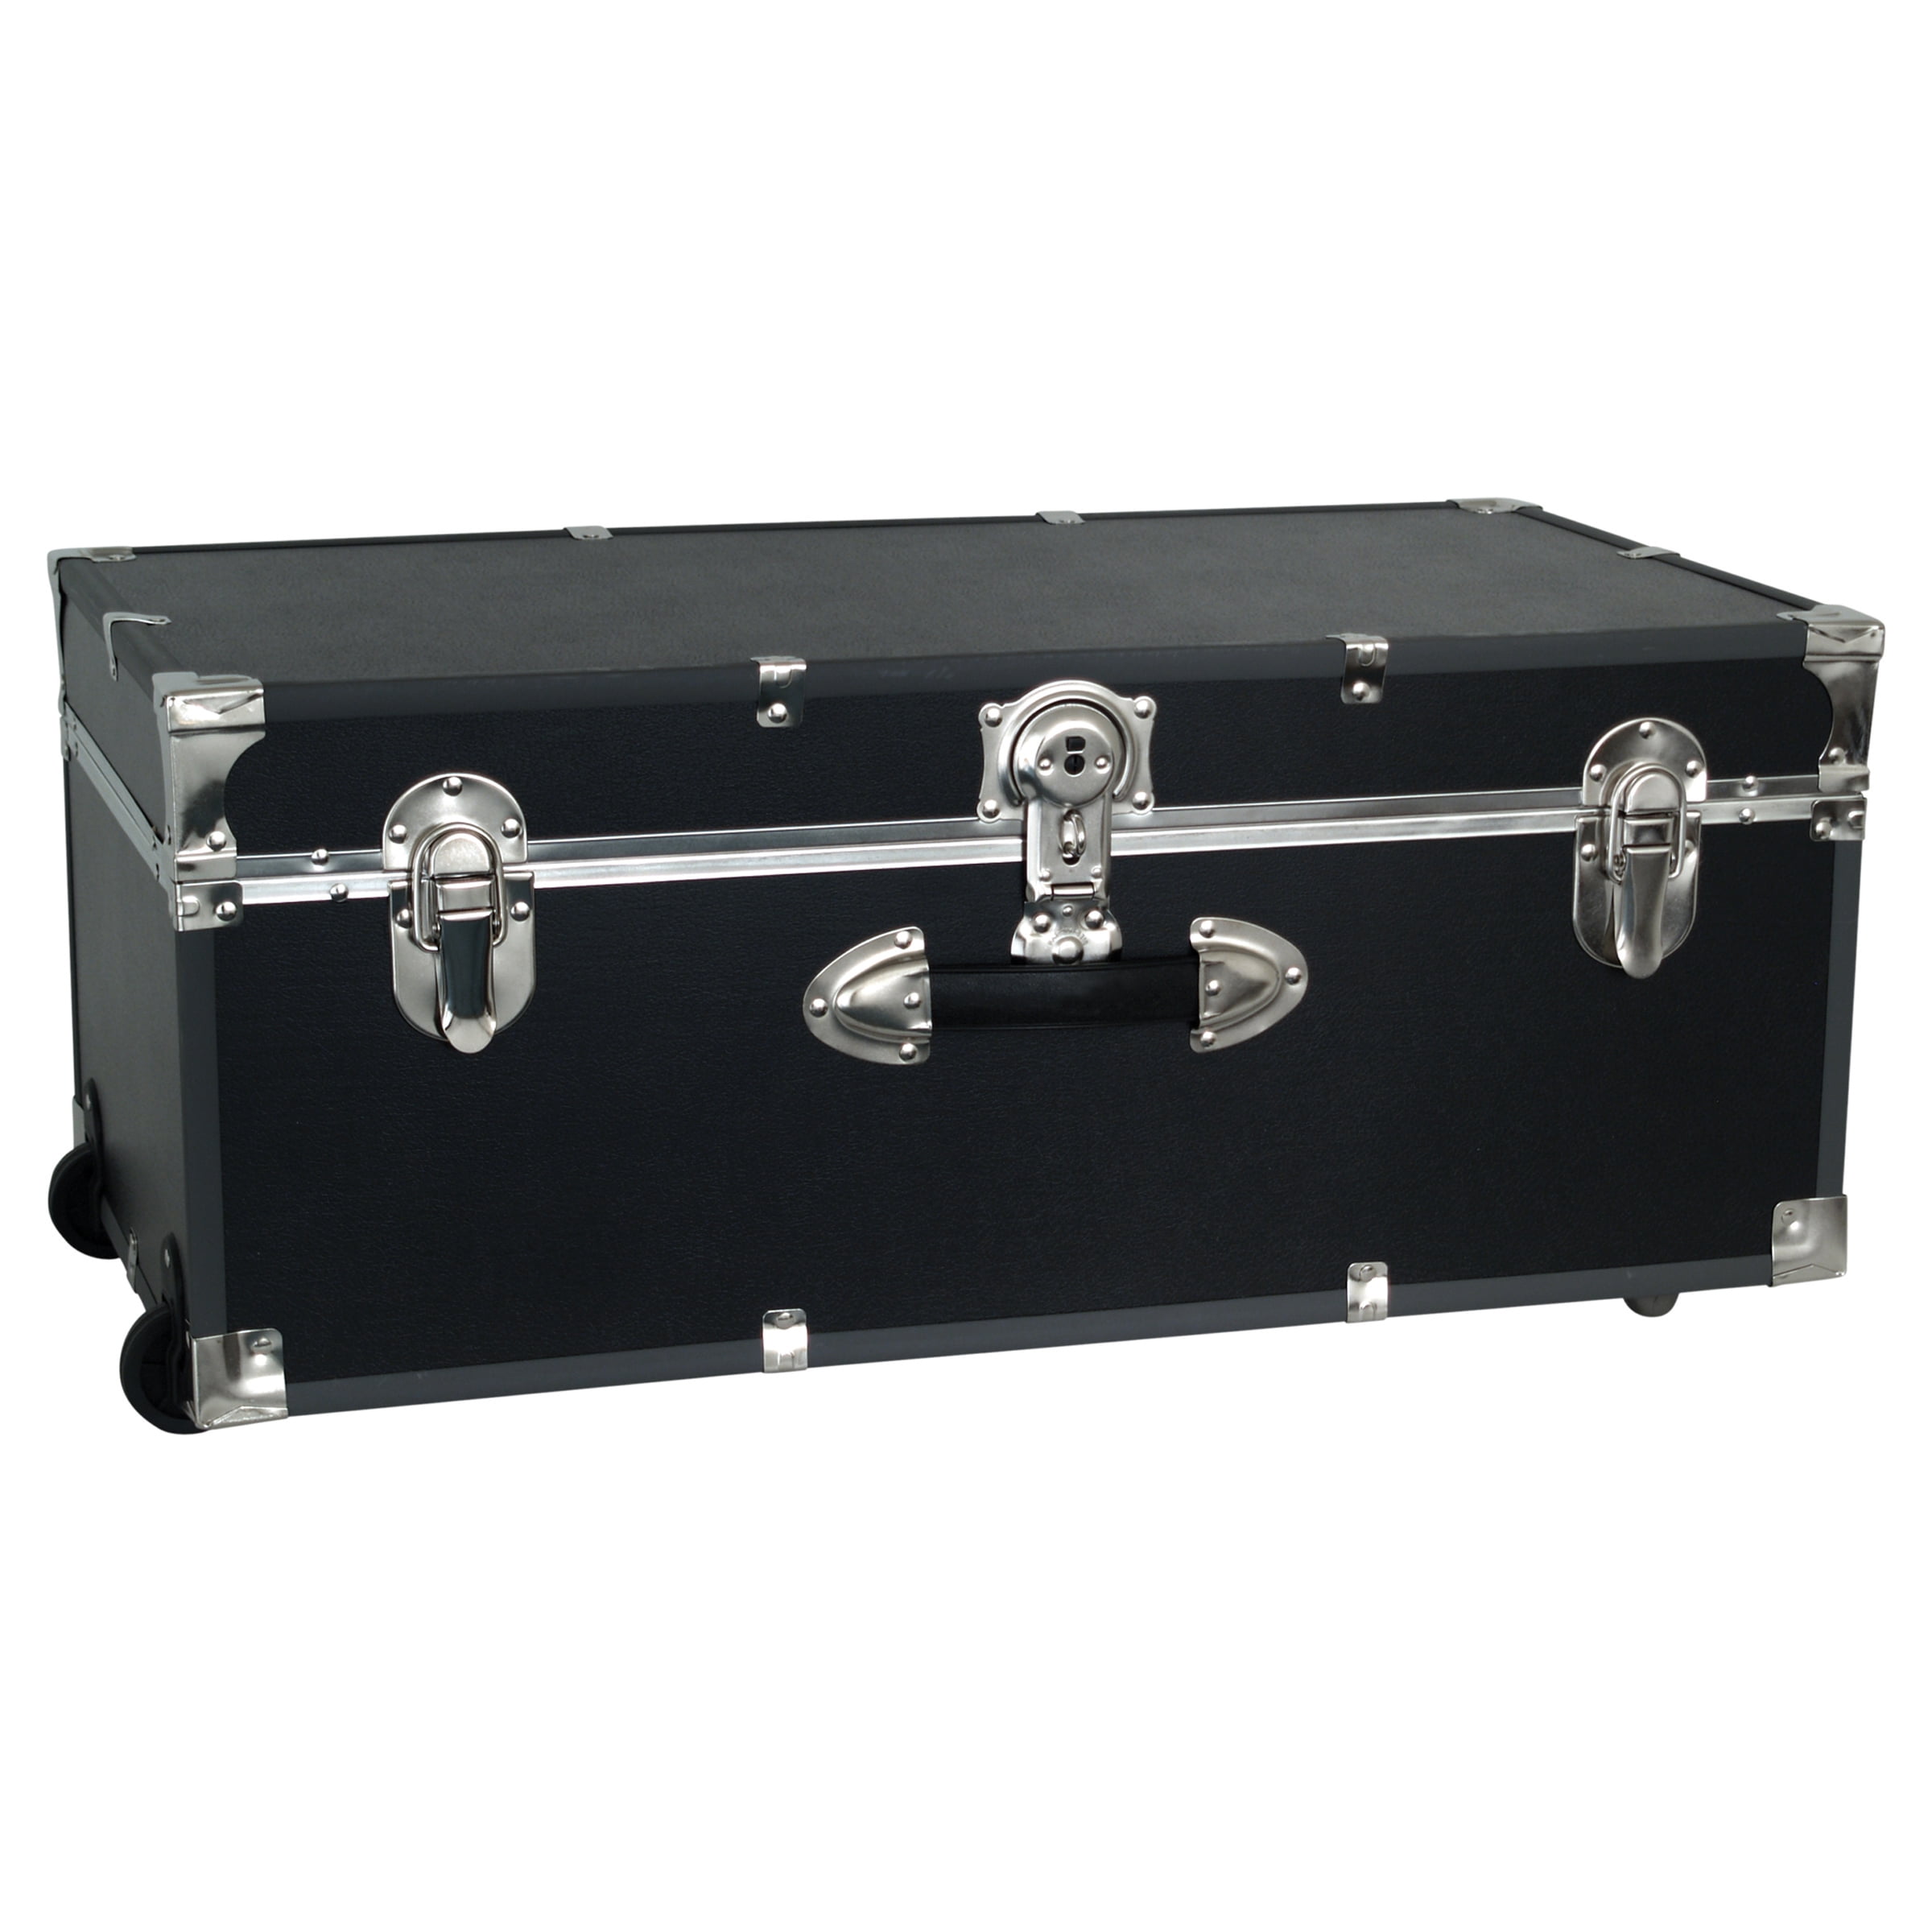 30 Inch Classic Footlocker Trunk with Lock End Table Toy Chest Dorm Room Storage 